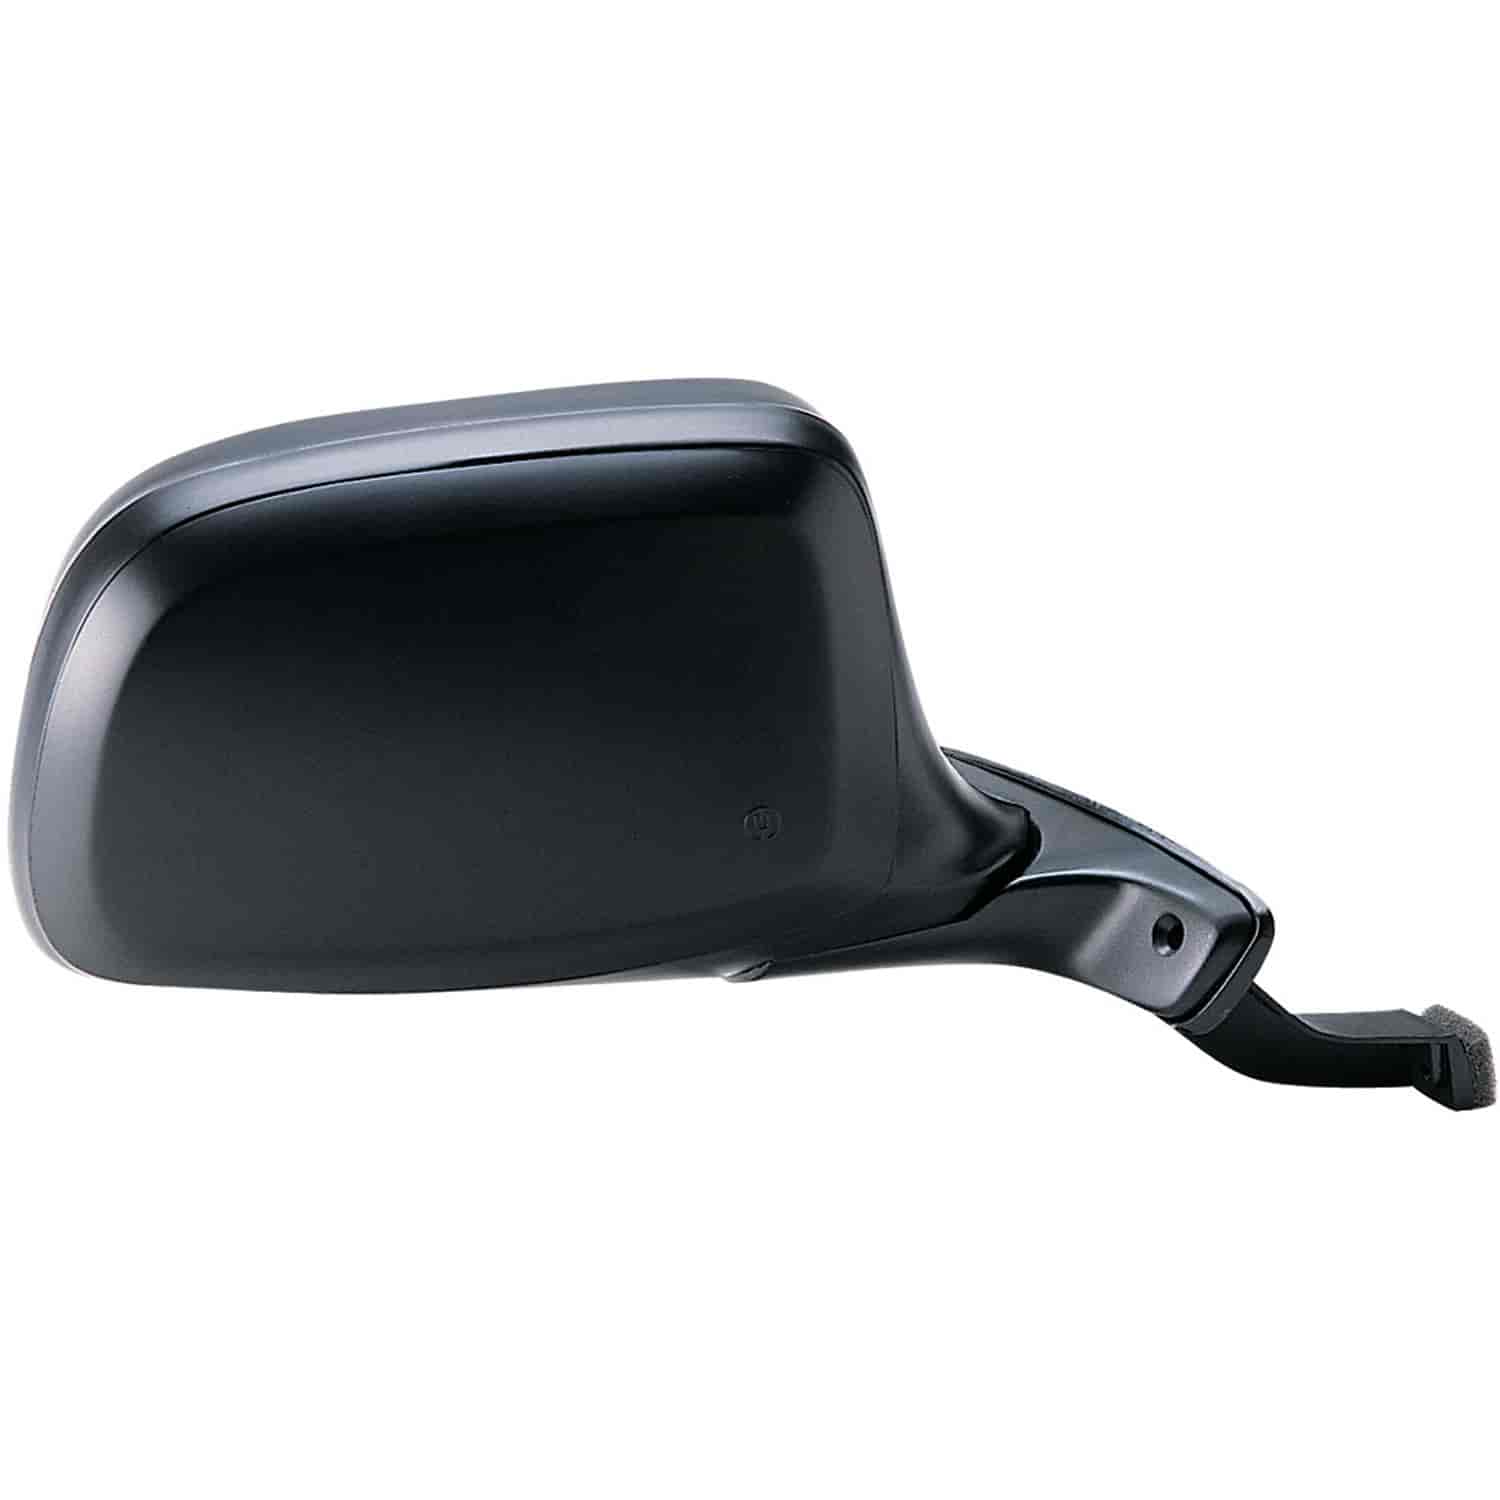 OEM Style Replacement mirror for 92-96 Bronco F150 F250 97 F250 HD 92-97 F350 passenger side mirror